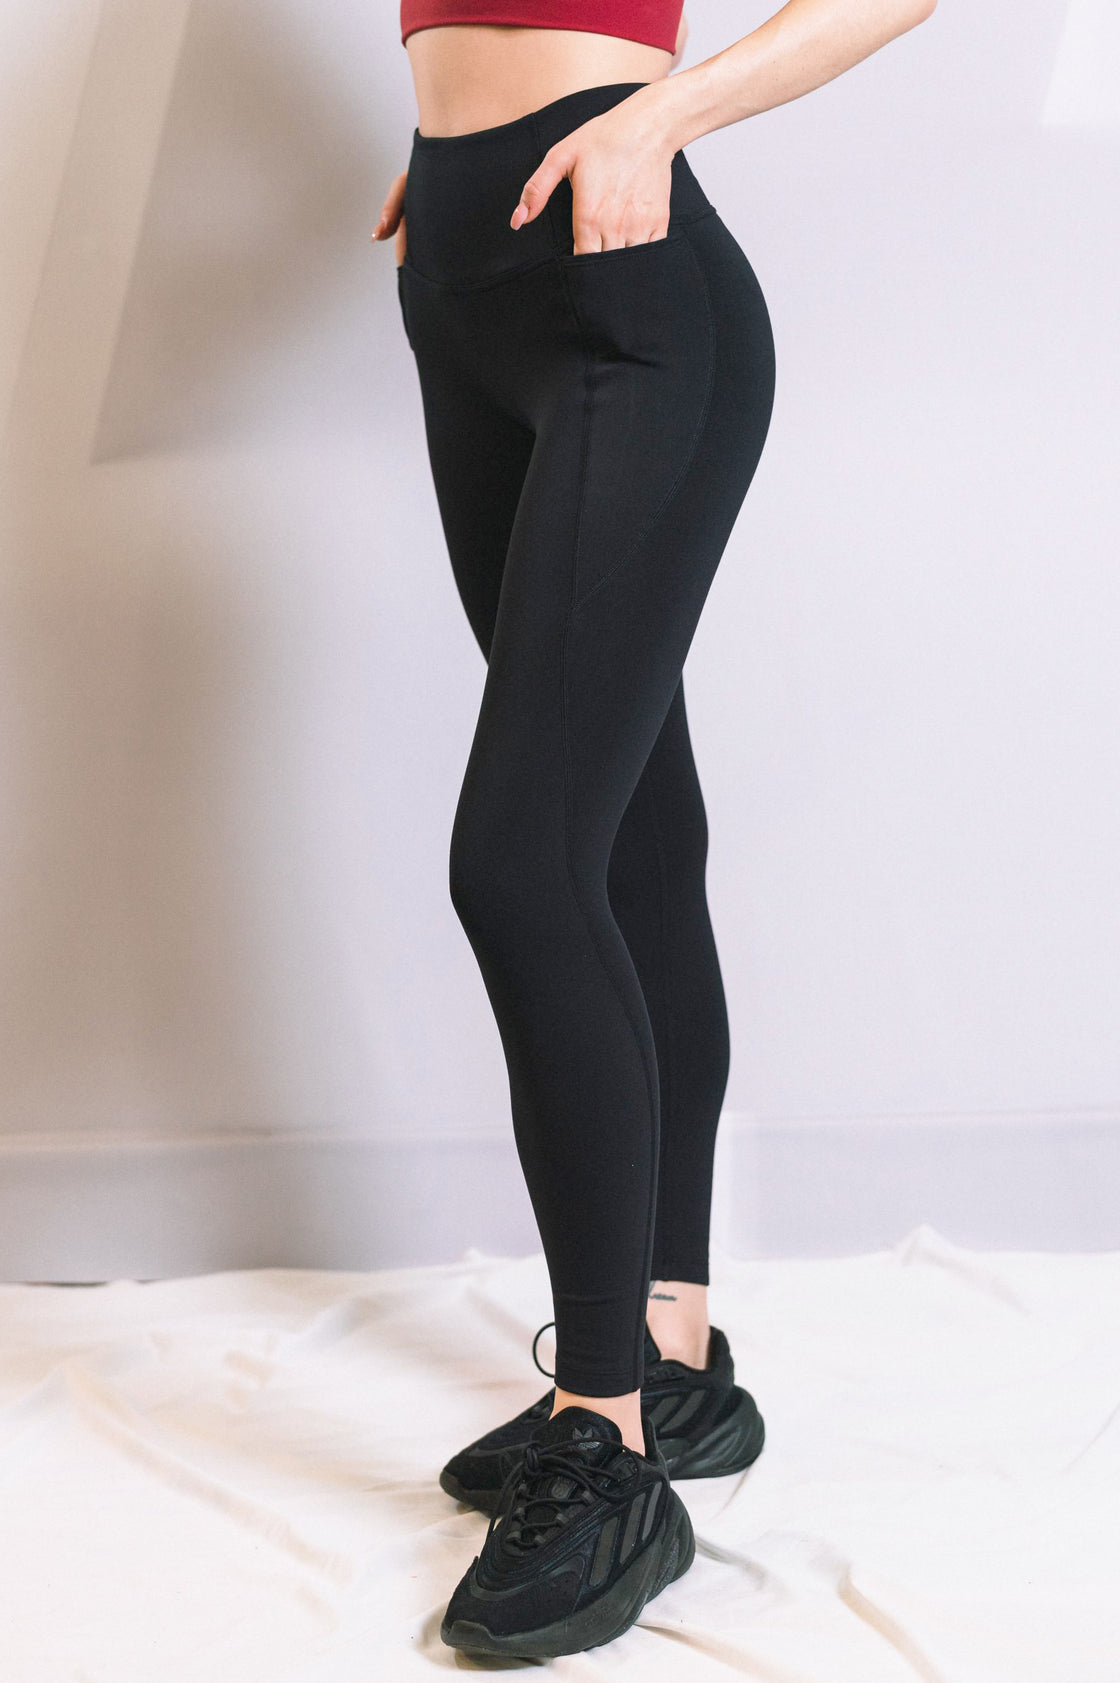 New release ZYIA Leggings - Athletic apparel